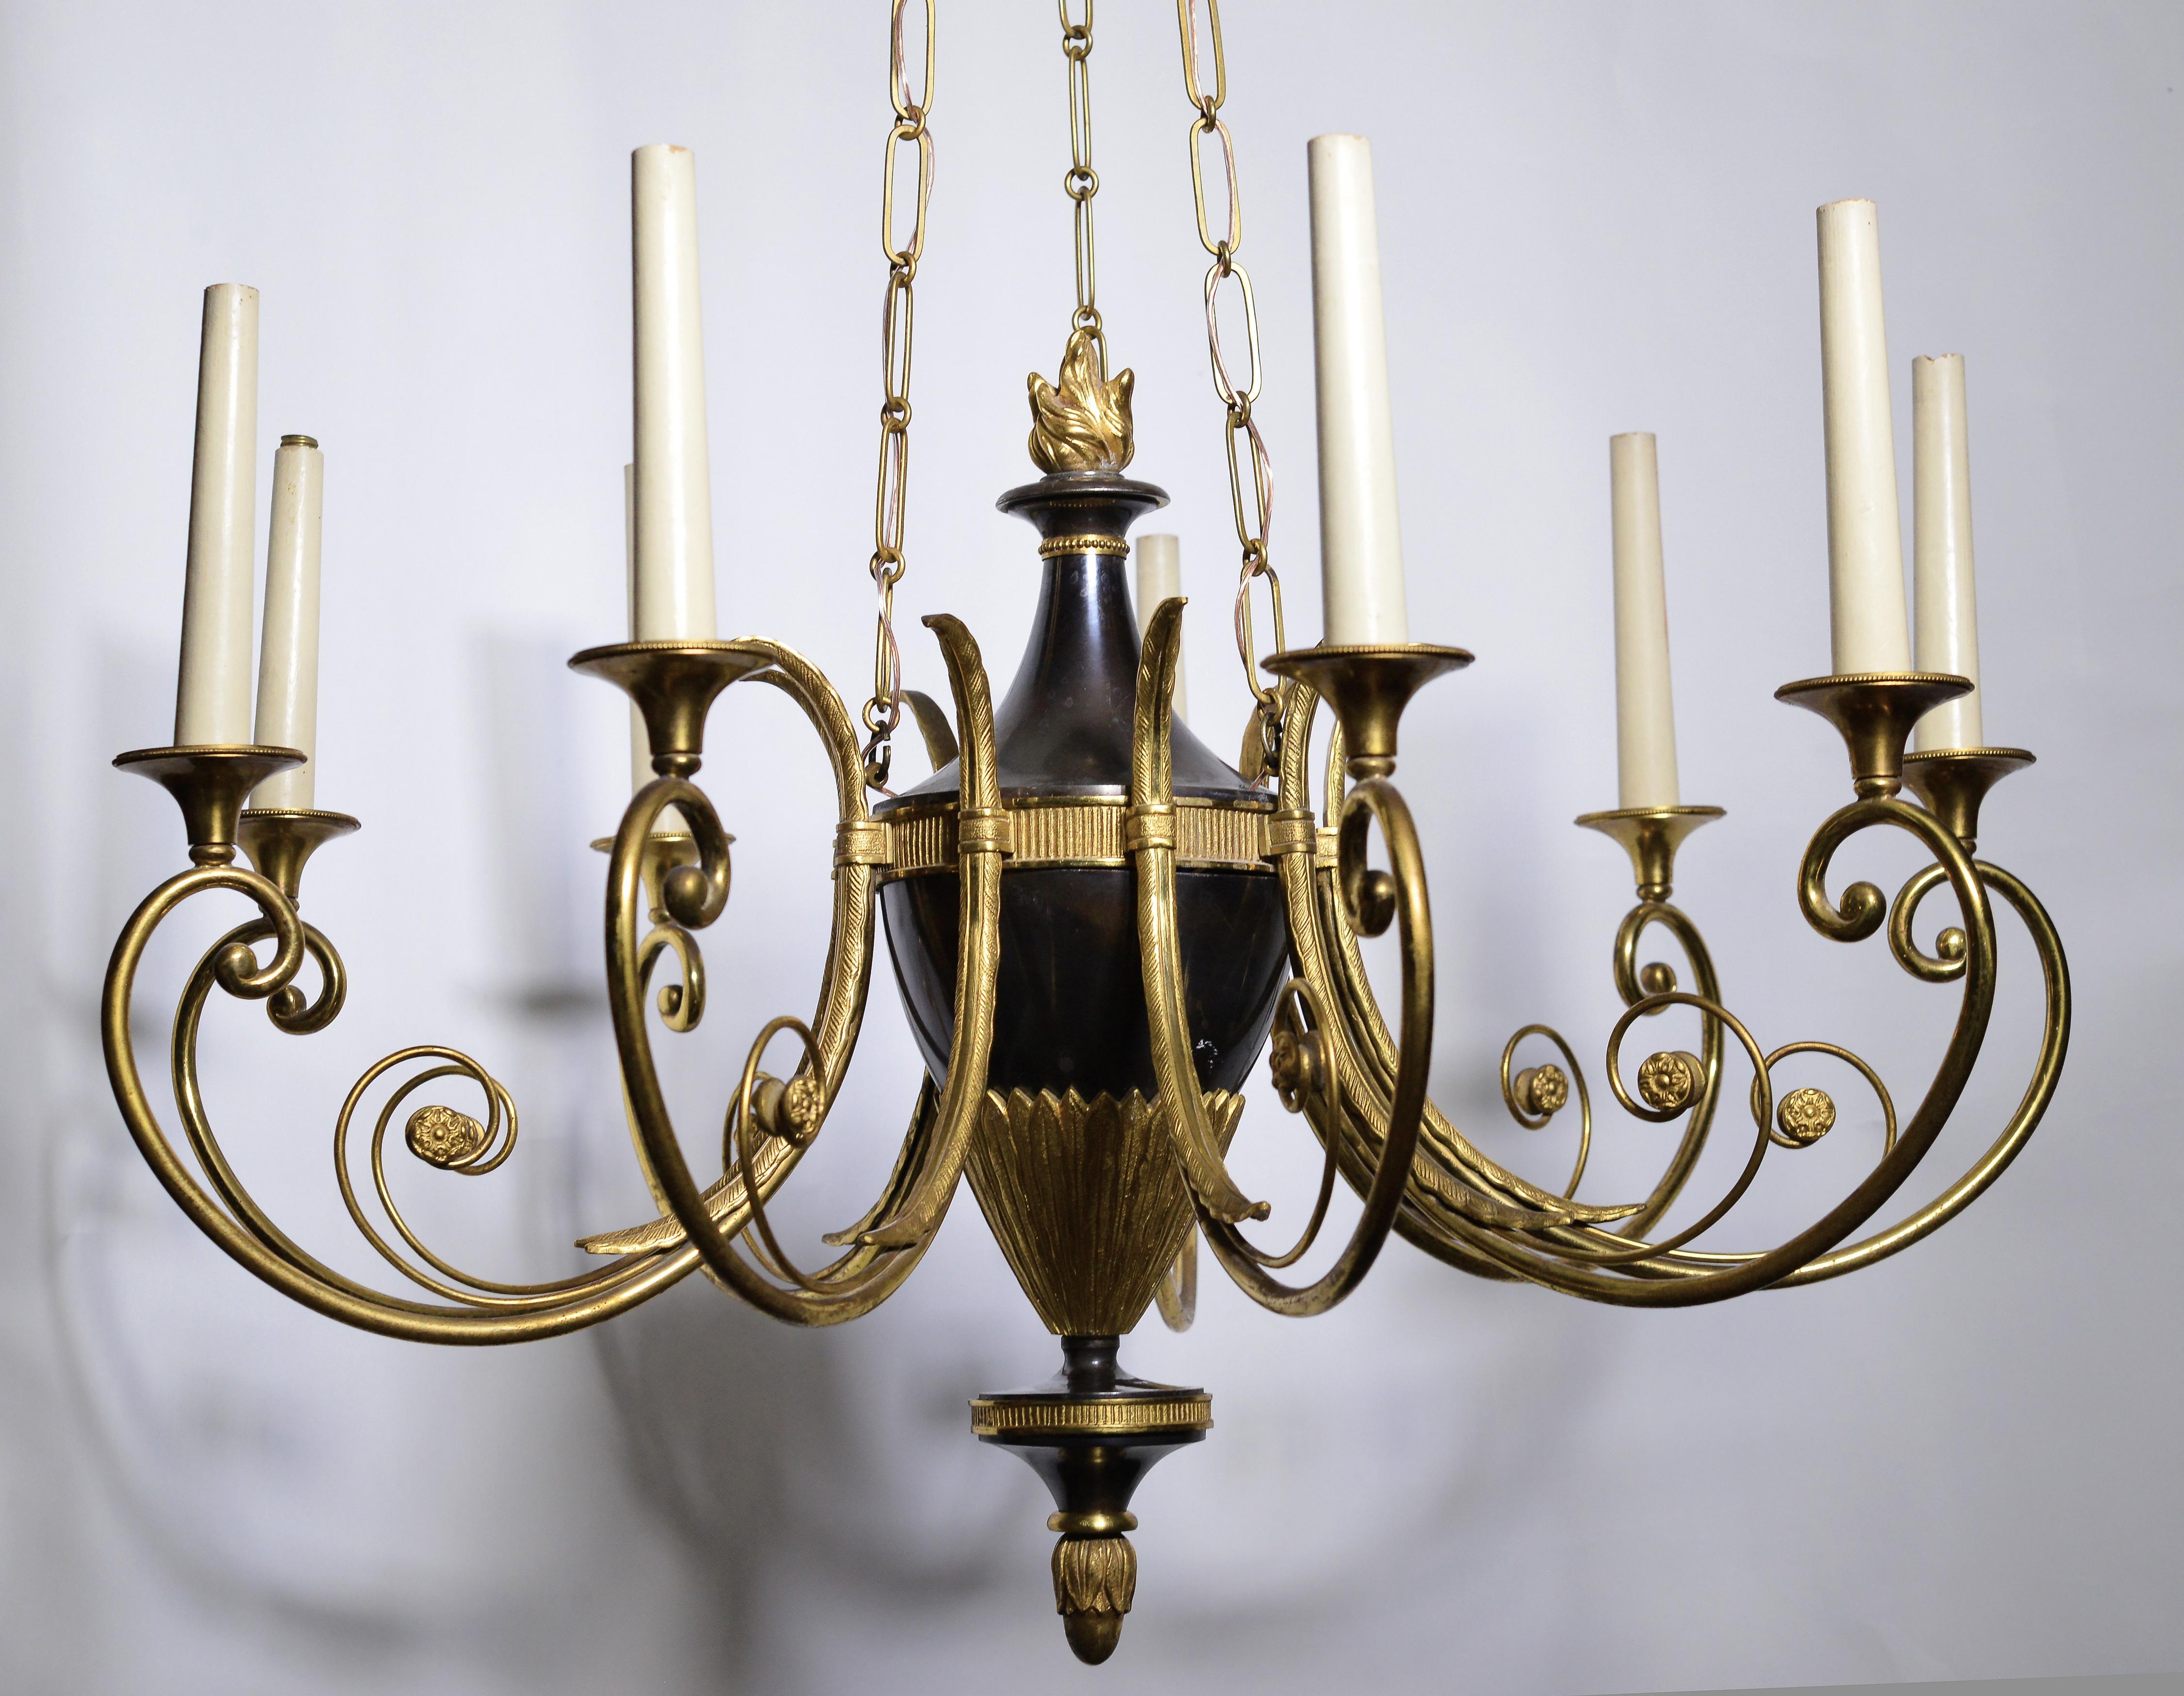 Fine chandelier with flame decoration at center top of amphora shape body. Weapons technology oxidation finish combined with dore bronze of finest quality – just gorgeous creature of most elegant forms made by unidentified continental workshop of